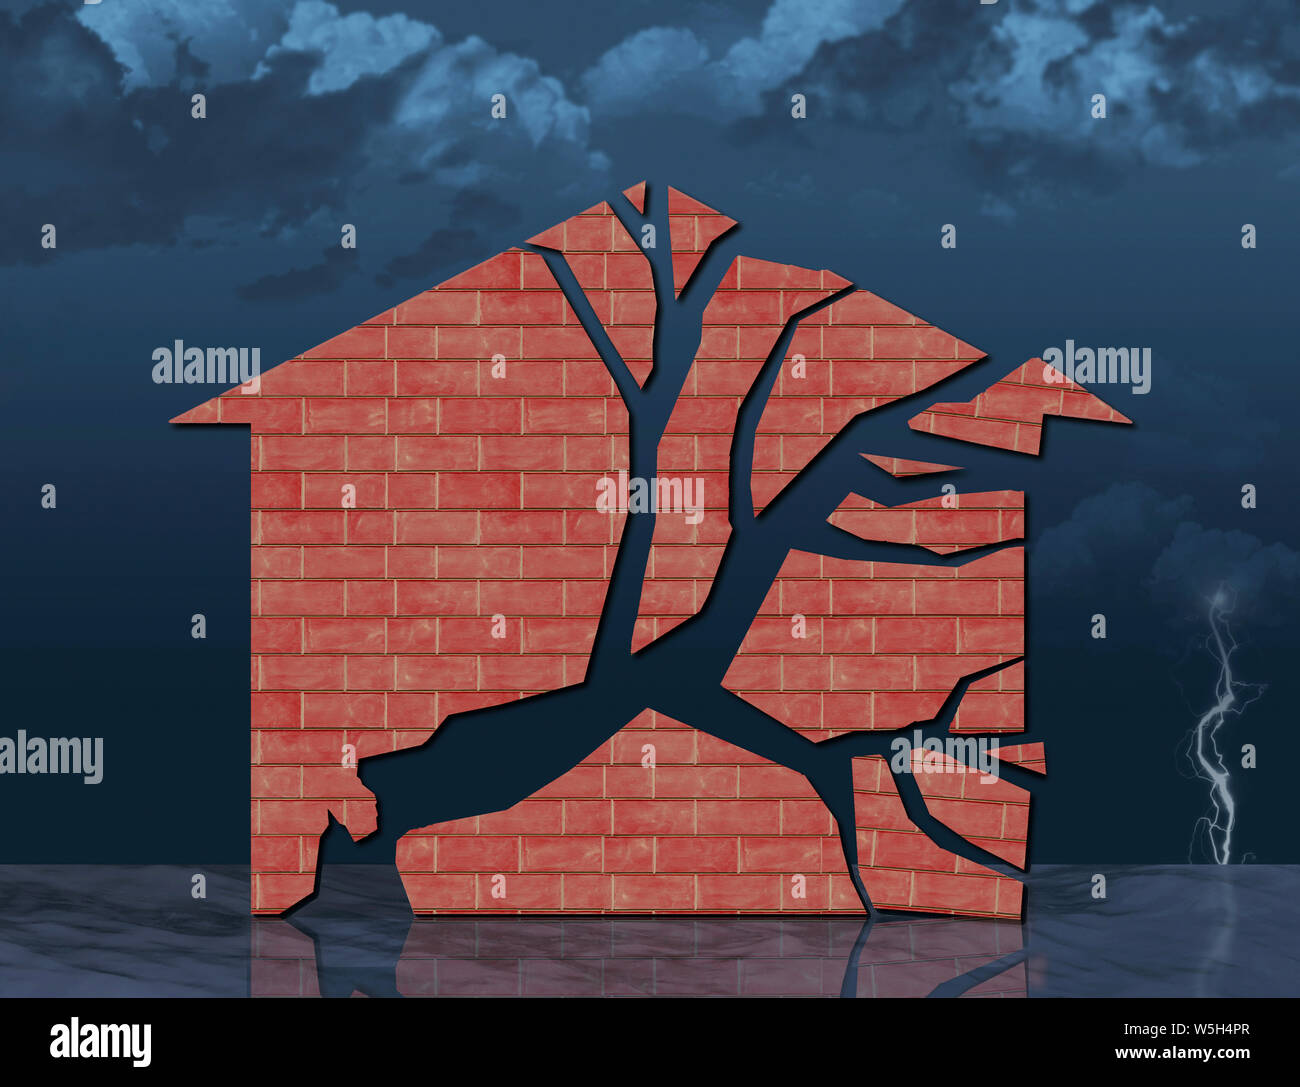 Storm damage to a home is the theme of this image. A brick home is shattered into the shape of a storm damaged tree as a storm rages in the background Stock Photo